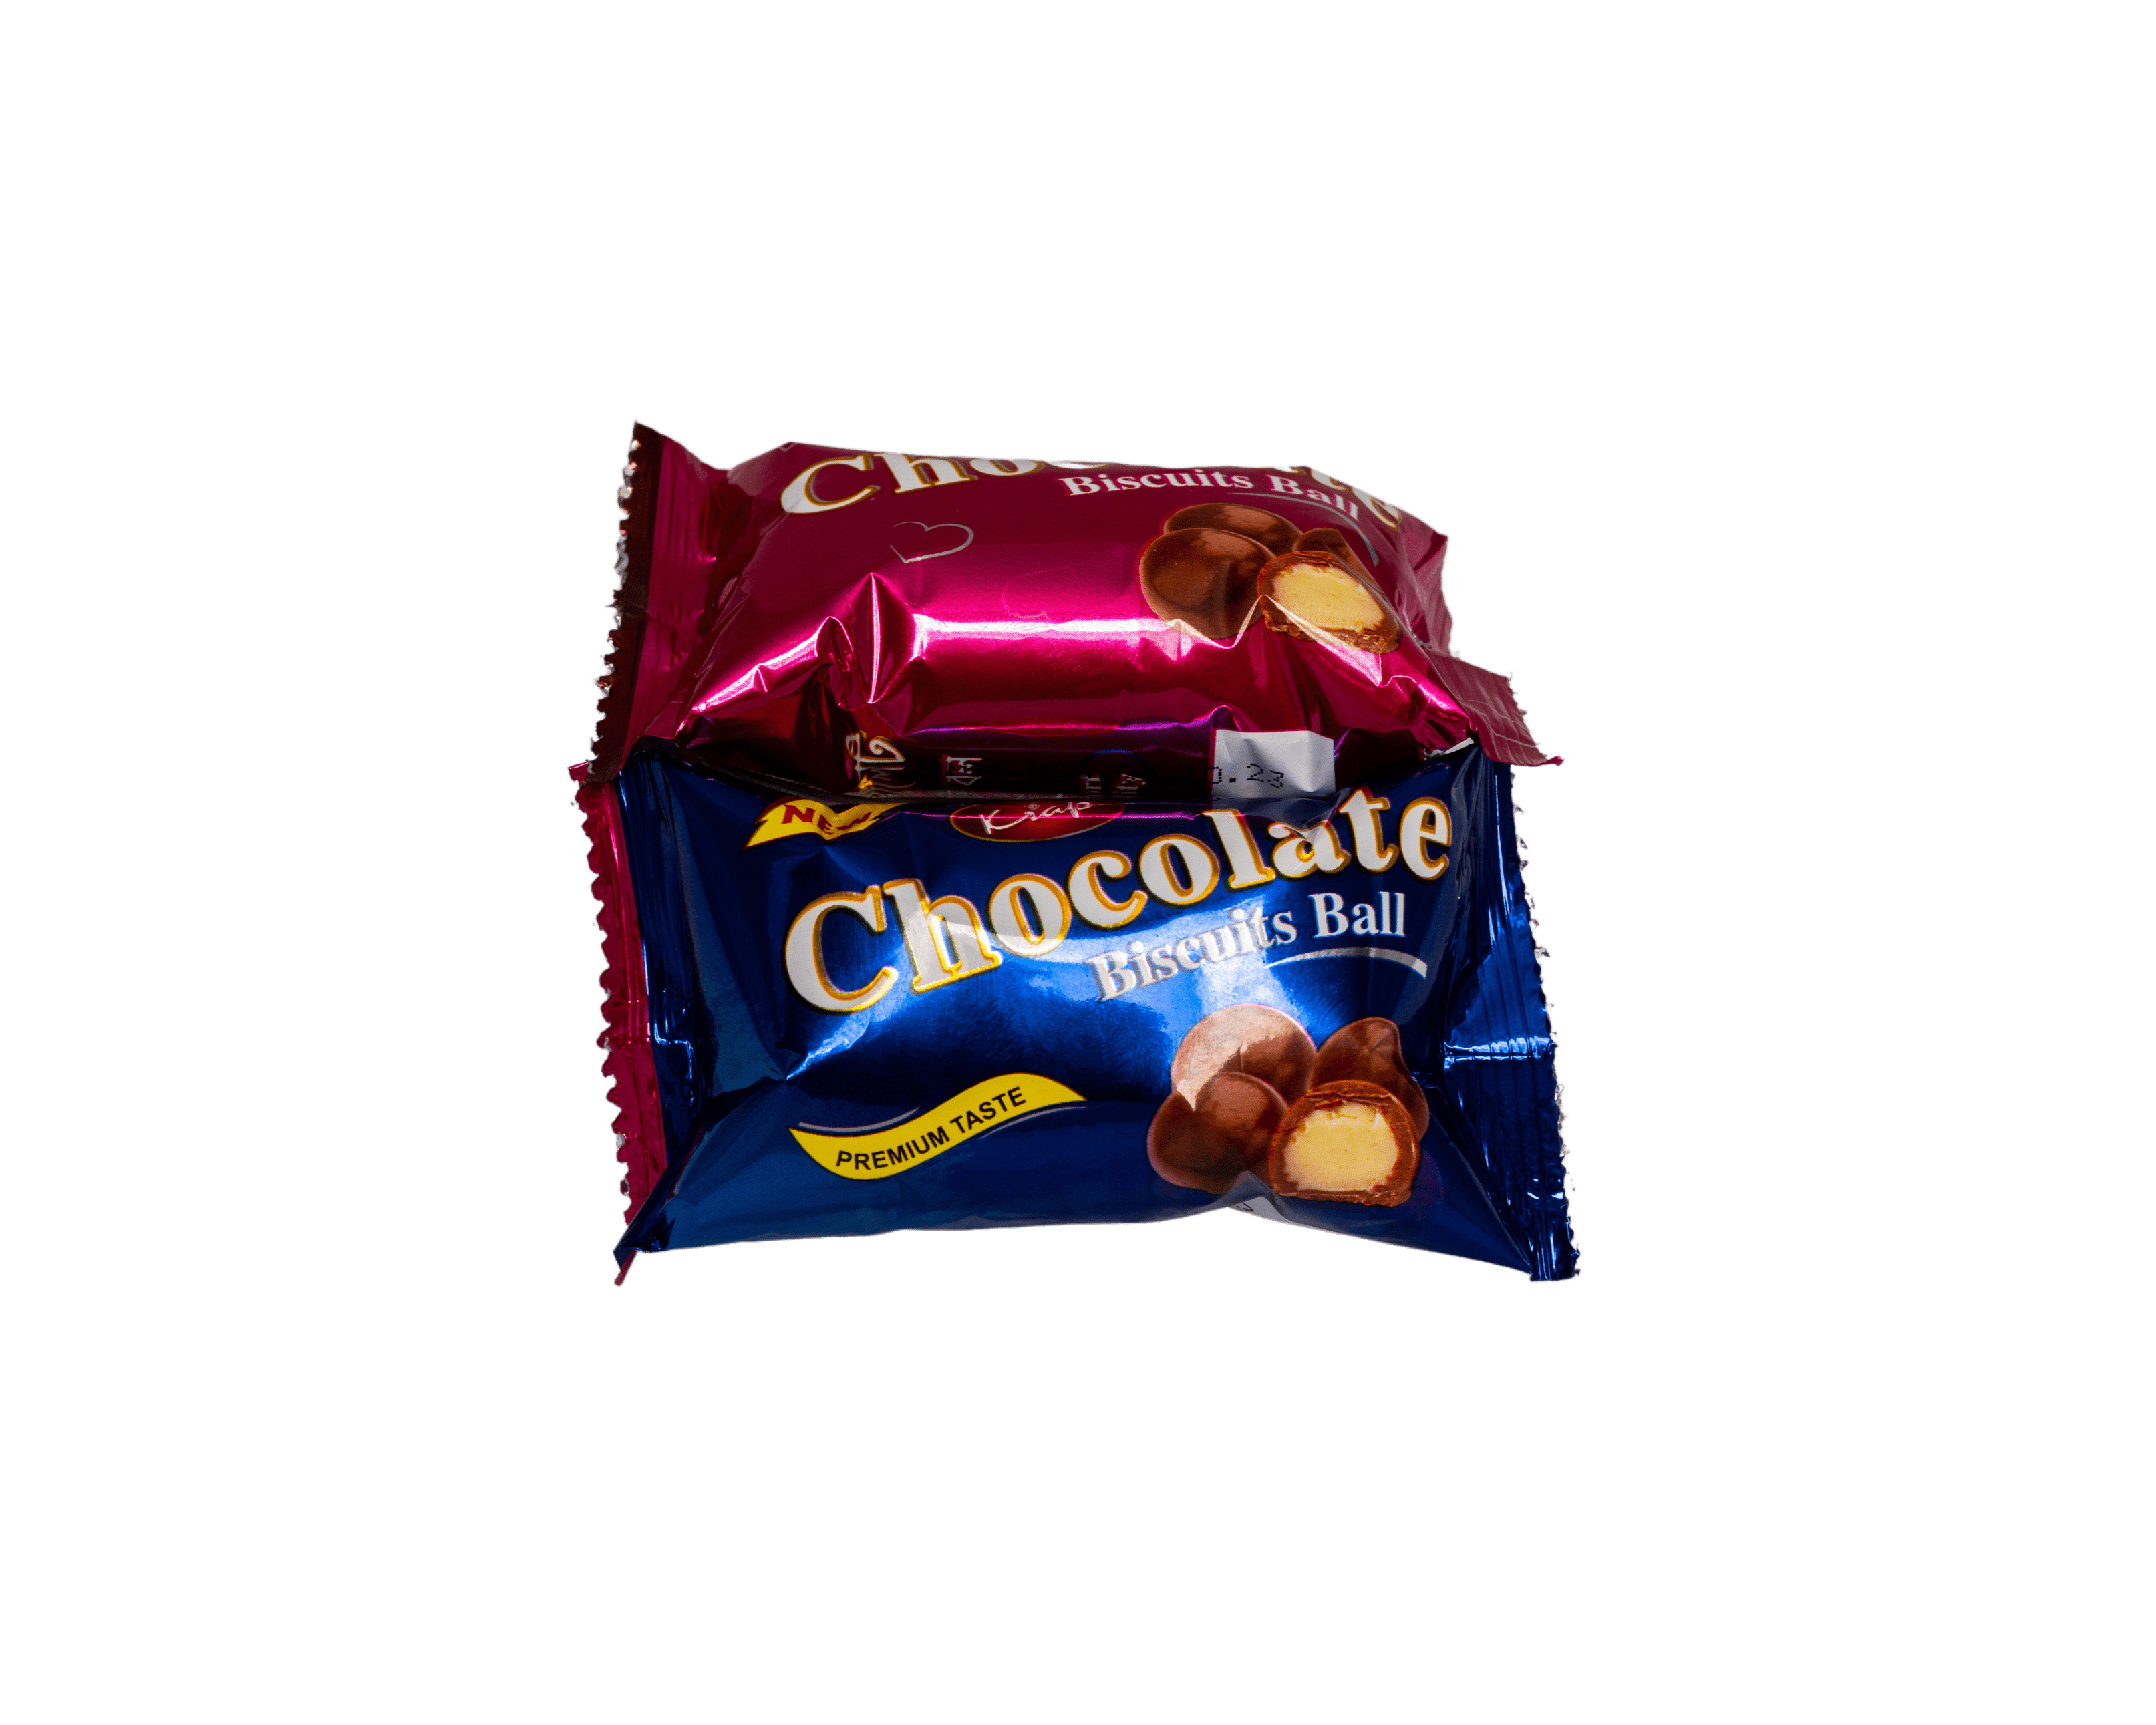 Krap Chocolate Biscuits Ball